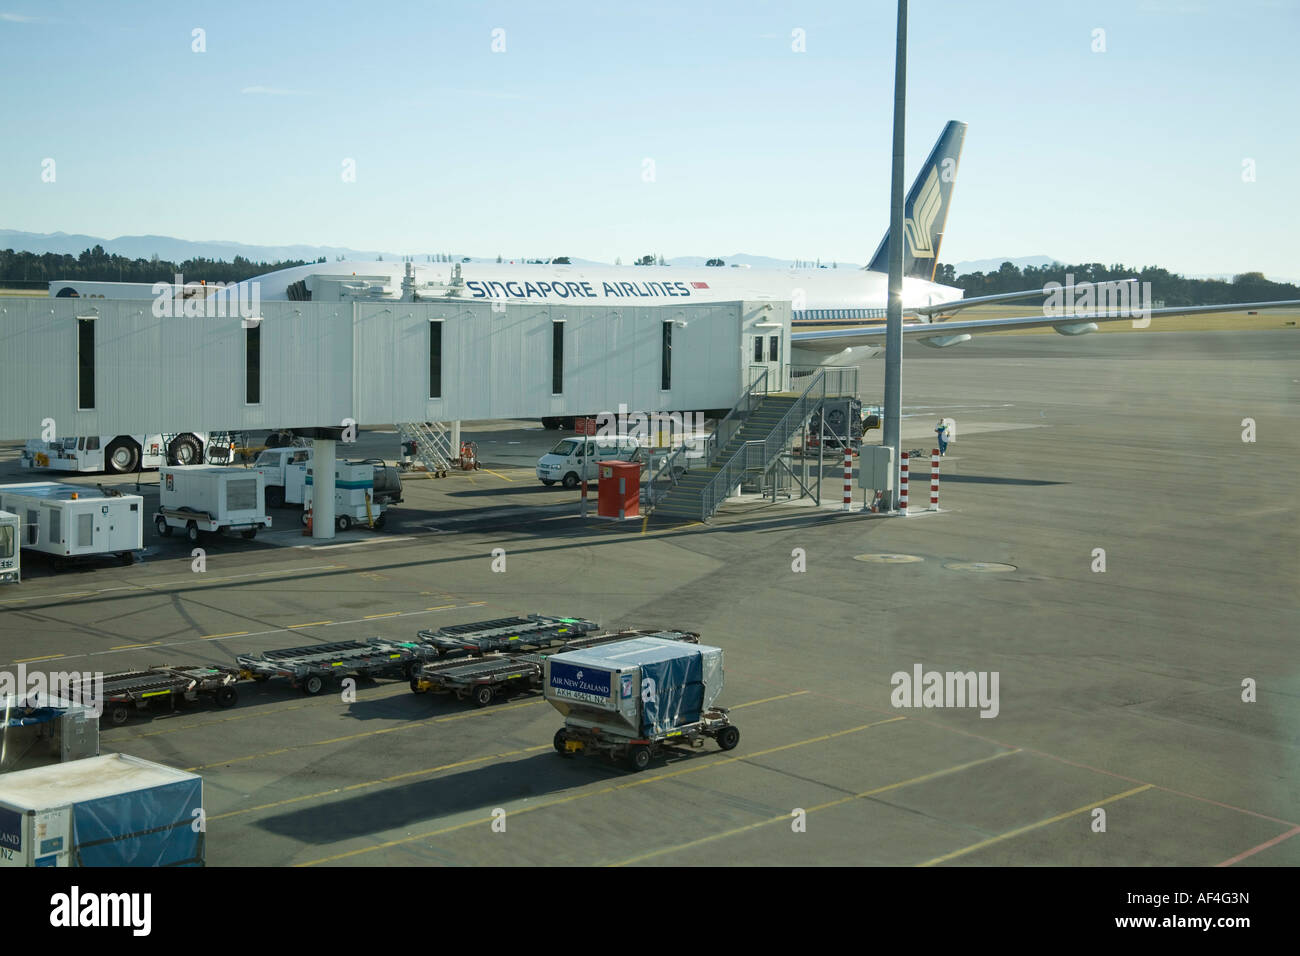 CHRISTCHURCH INTERNATIONAL AIRPORT SOUTH ISLAND NEW ZEALAND May A Singapore Airlines plane parked at an air bridge Stock Photo